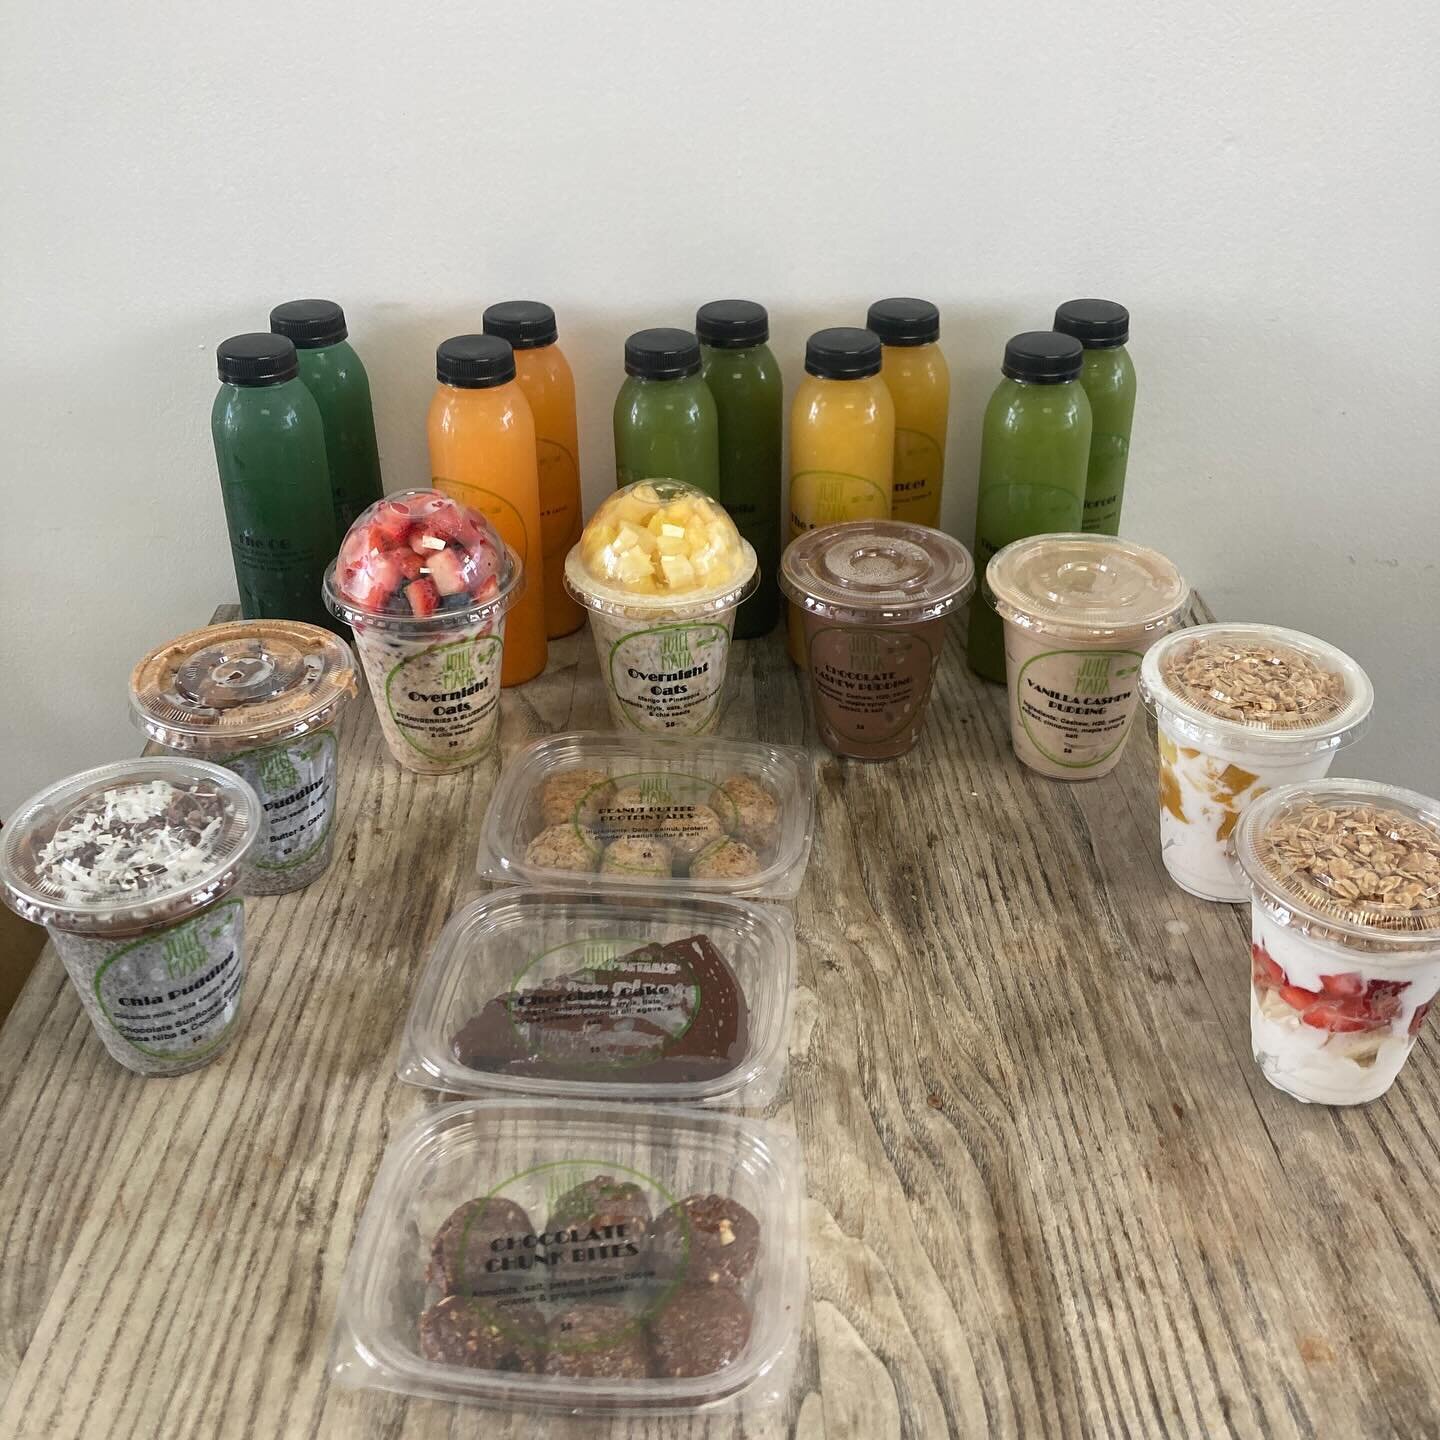 We are so excited with the positive feedback for our new delivery service! We are proud to bring you the opportunity to make it insanely easy to have juices and snacks fill your fridge to help everyone in the house make better decisions on what they 